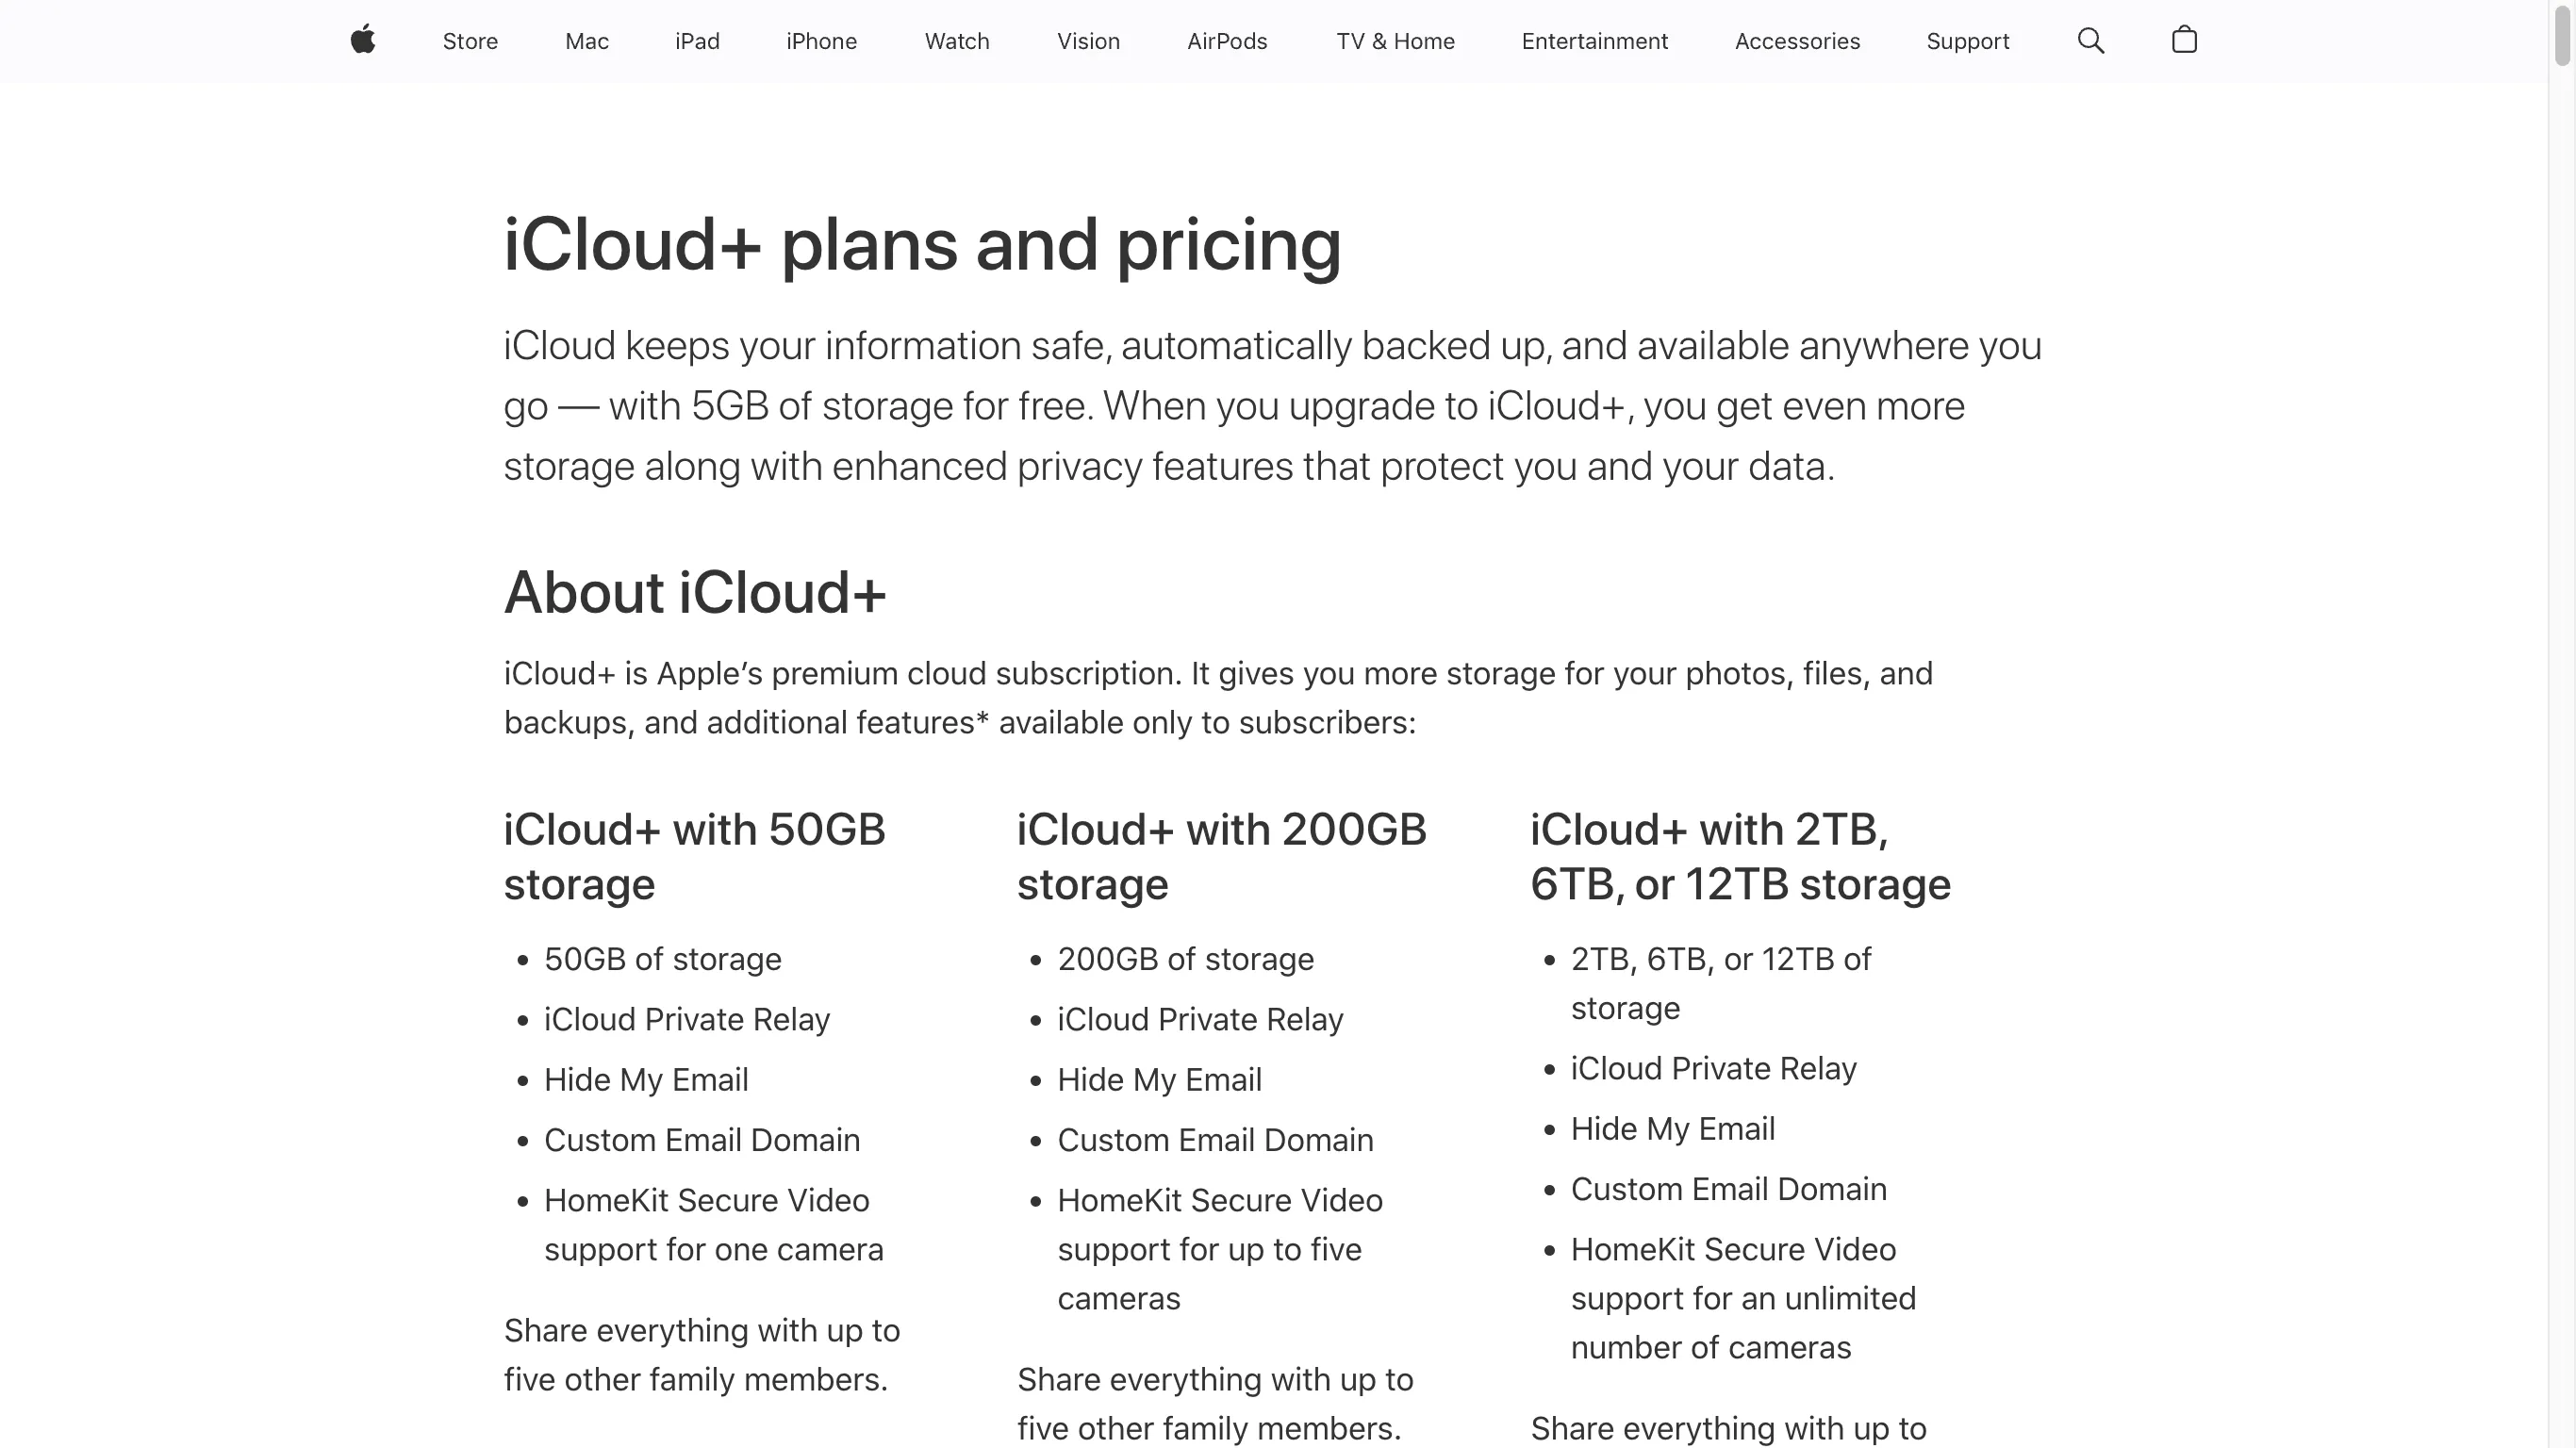 Apple Mail (iCloud) is a closed-source email service.